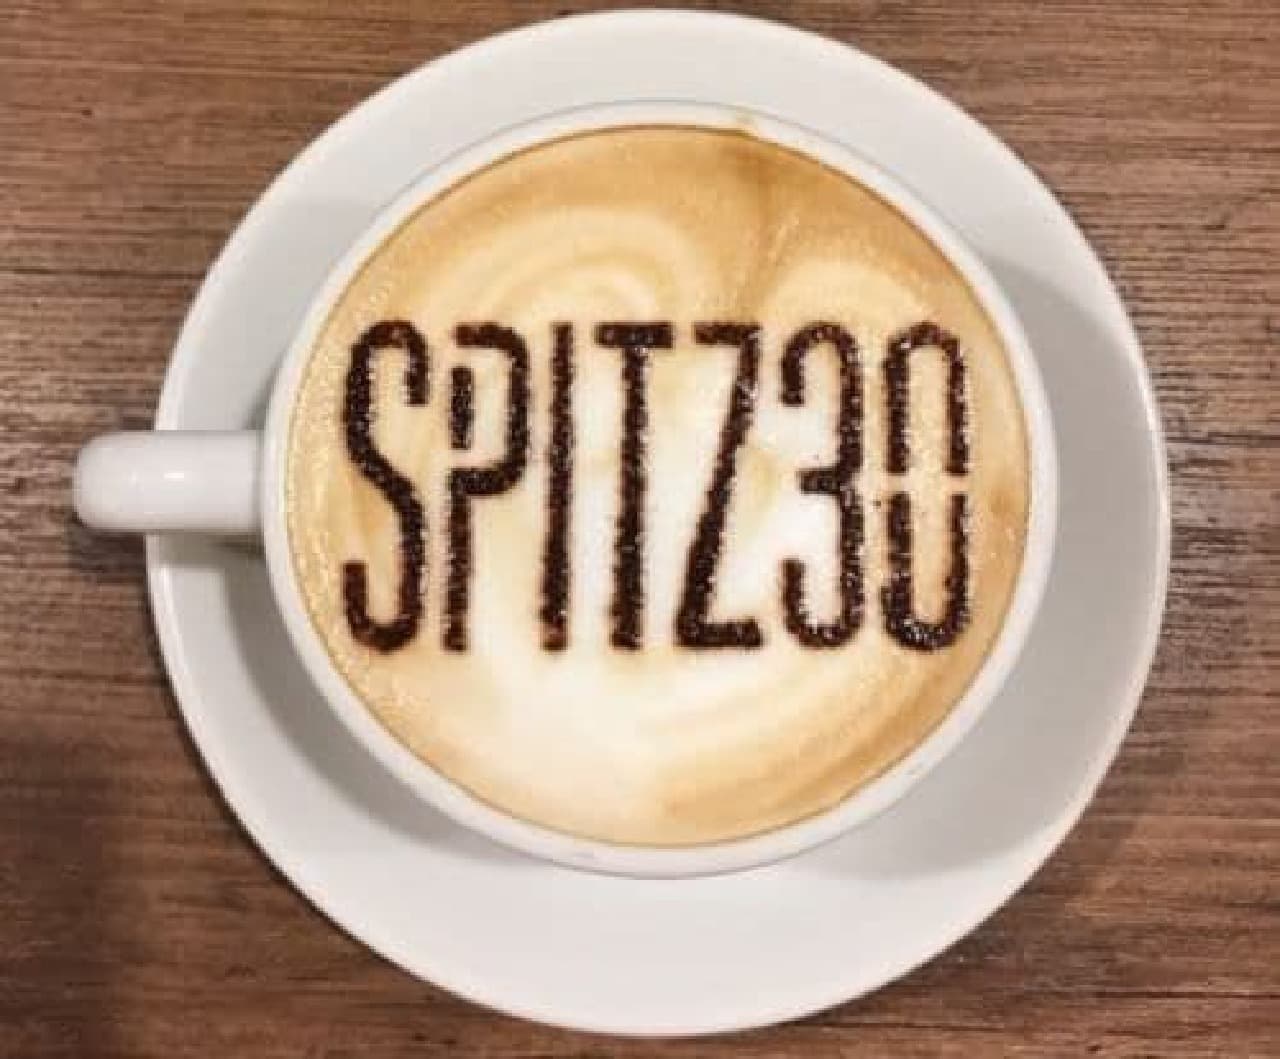 "SPITZ 30th ANNIVERSARY CAFE" is a cafe held to commemorate the release of all Spitz singles, which is celebrating its 30th anniversary.